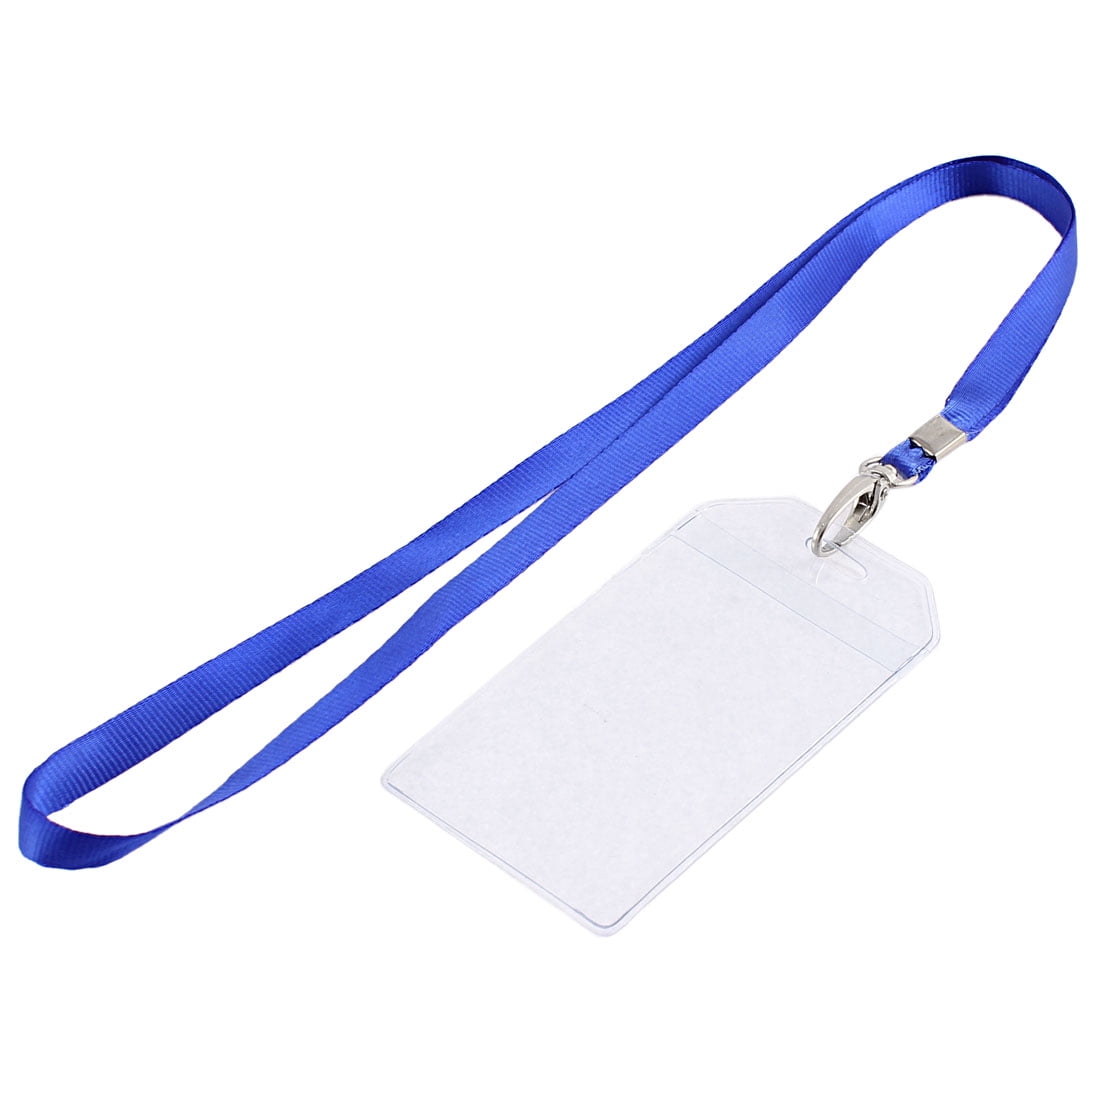 Unique Bargains Plastic ID Card Holder Lanyard Name School Office Bank  Students Stationery Blue w Neck Strap